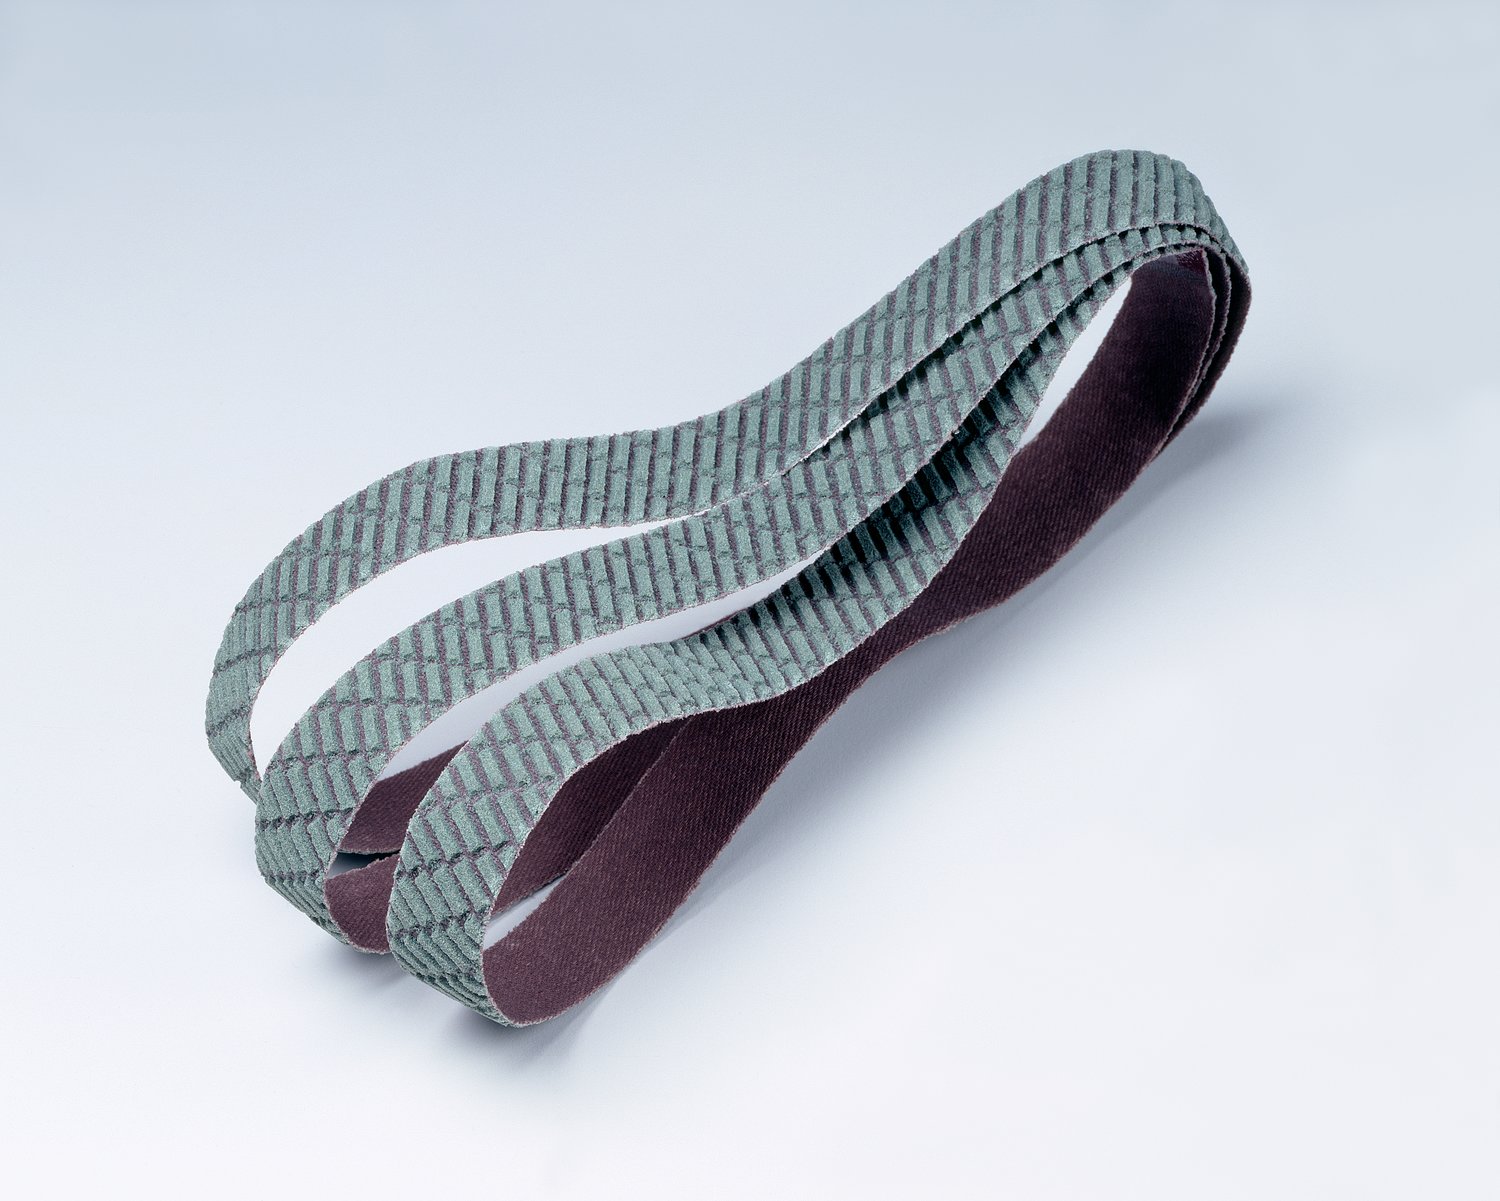 7100052817 - 3M Trizact Cloth Belt 327DC, A160 X-weight, Config